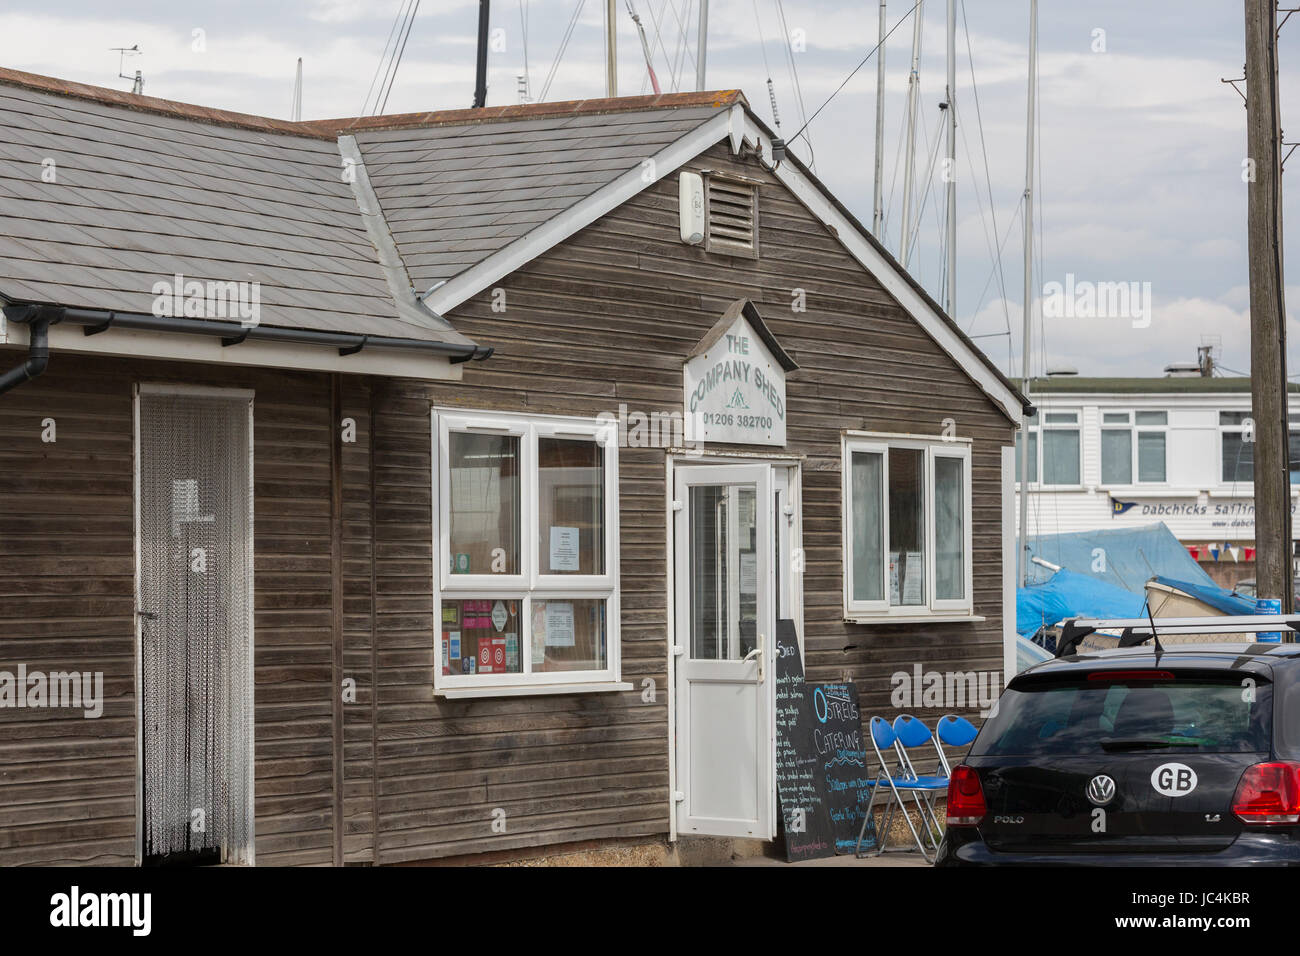 West Mersea, The Company Shed restaurant Stock Photo